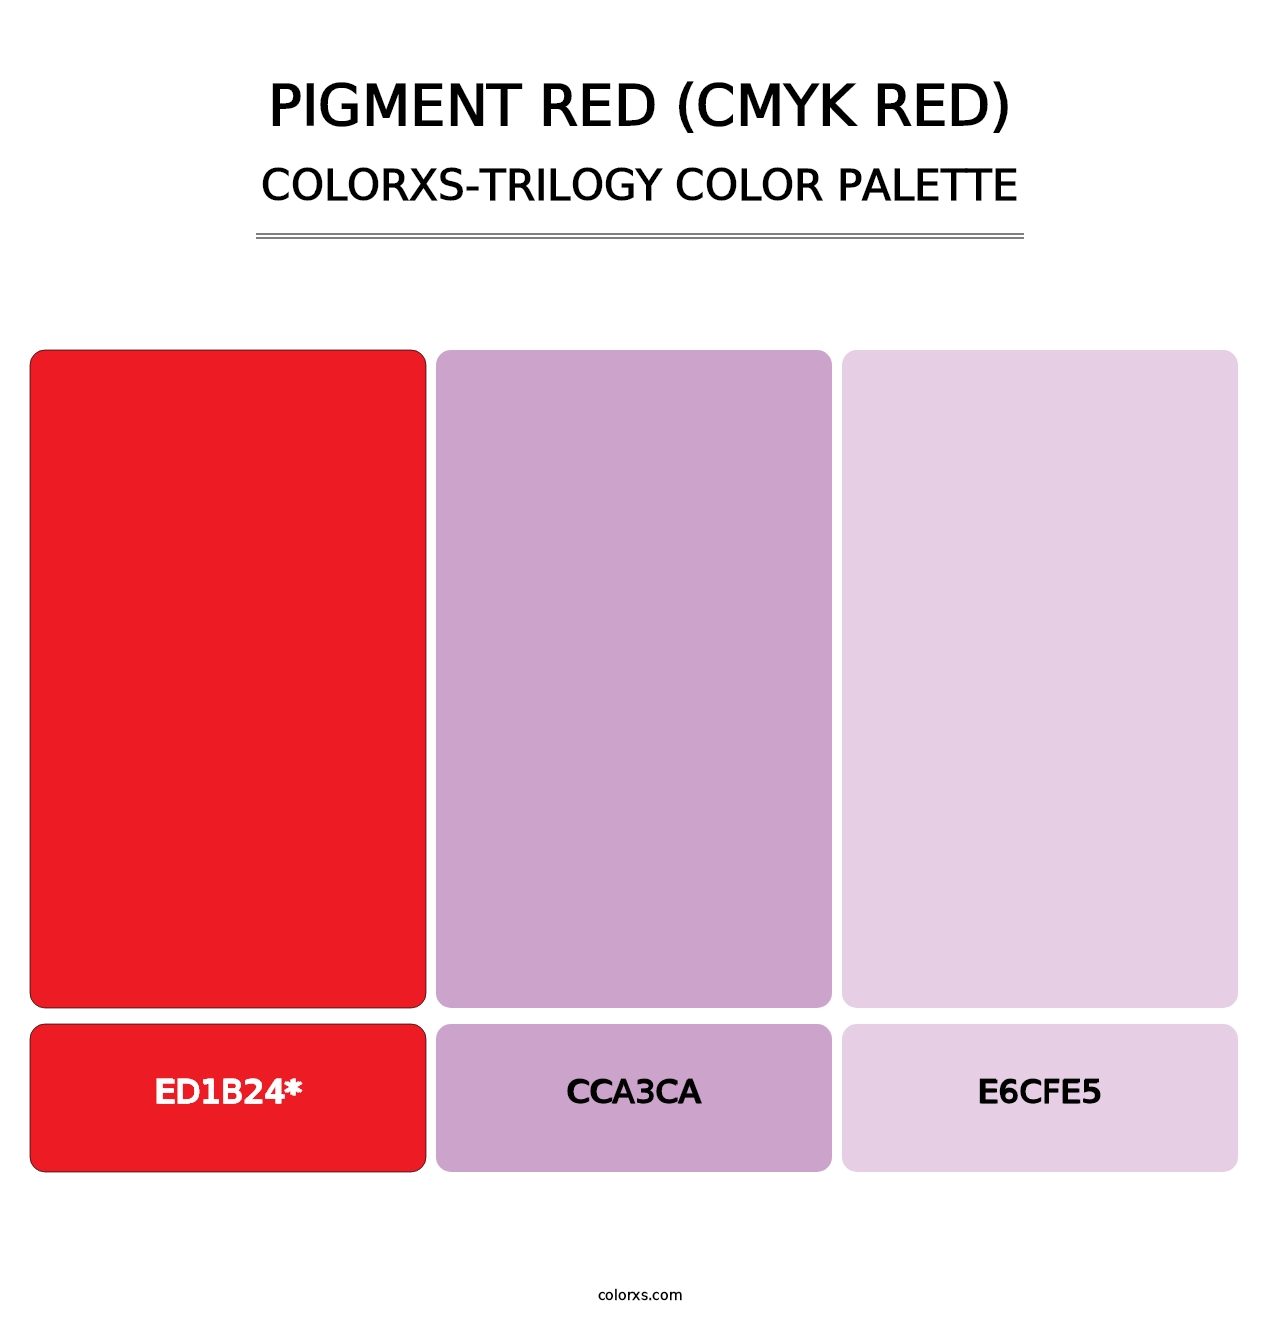 Pigment Red (CMYK Red) - Colorxs Trilogy Palette